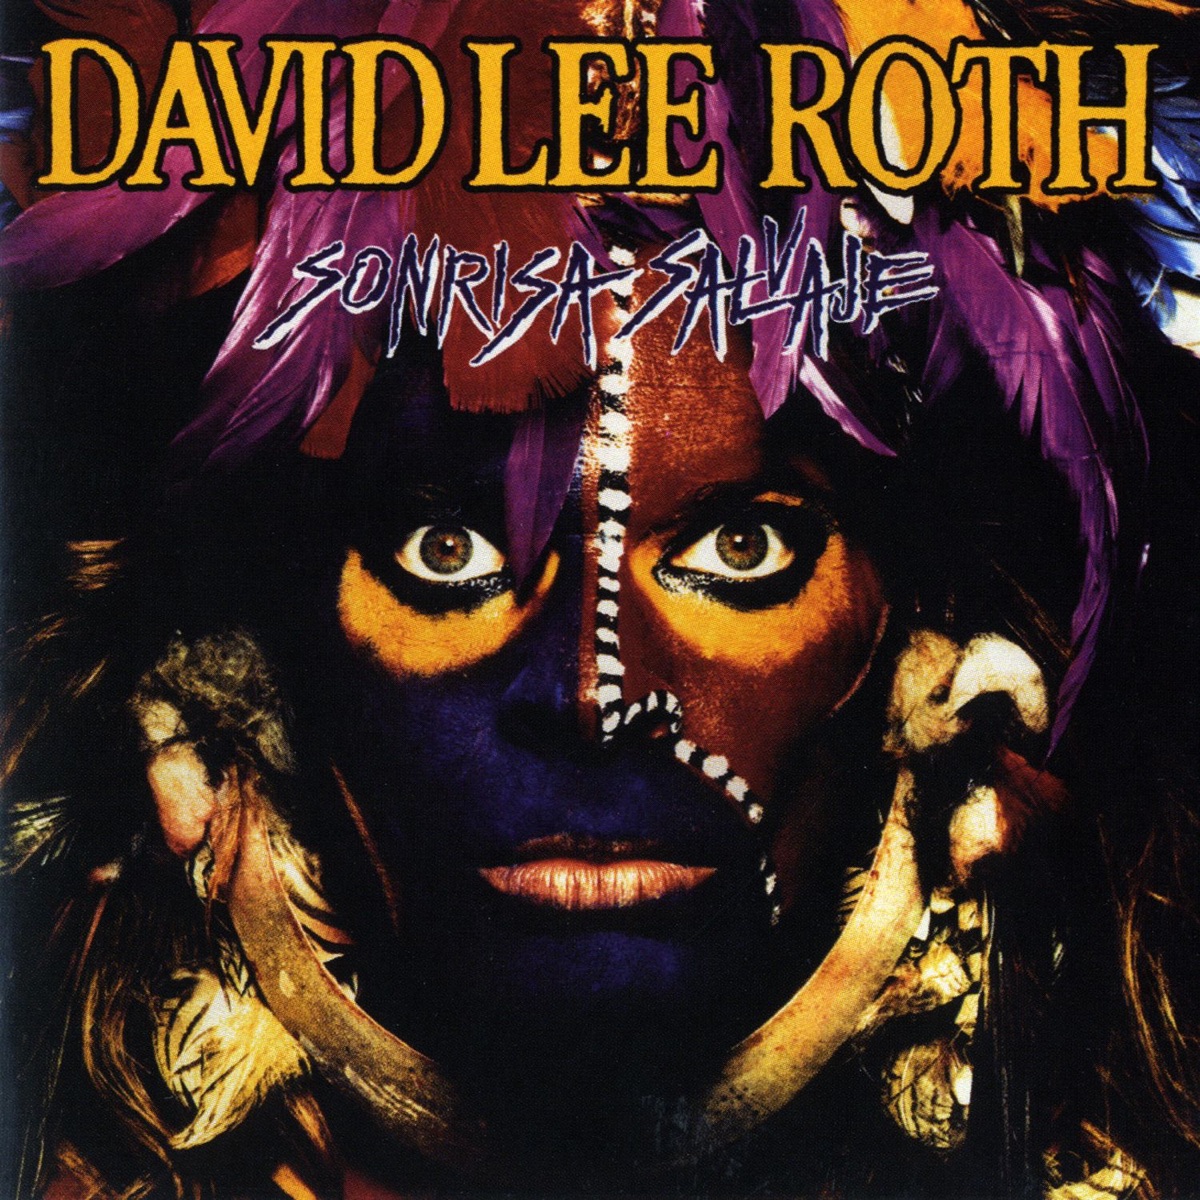 Pointing at the Moon - Single by David Lee Roth on Apple Music